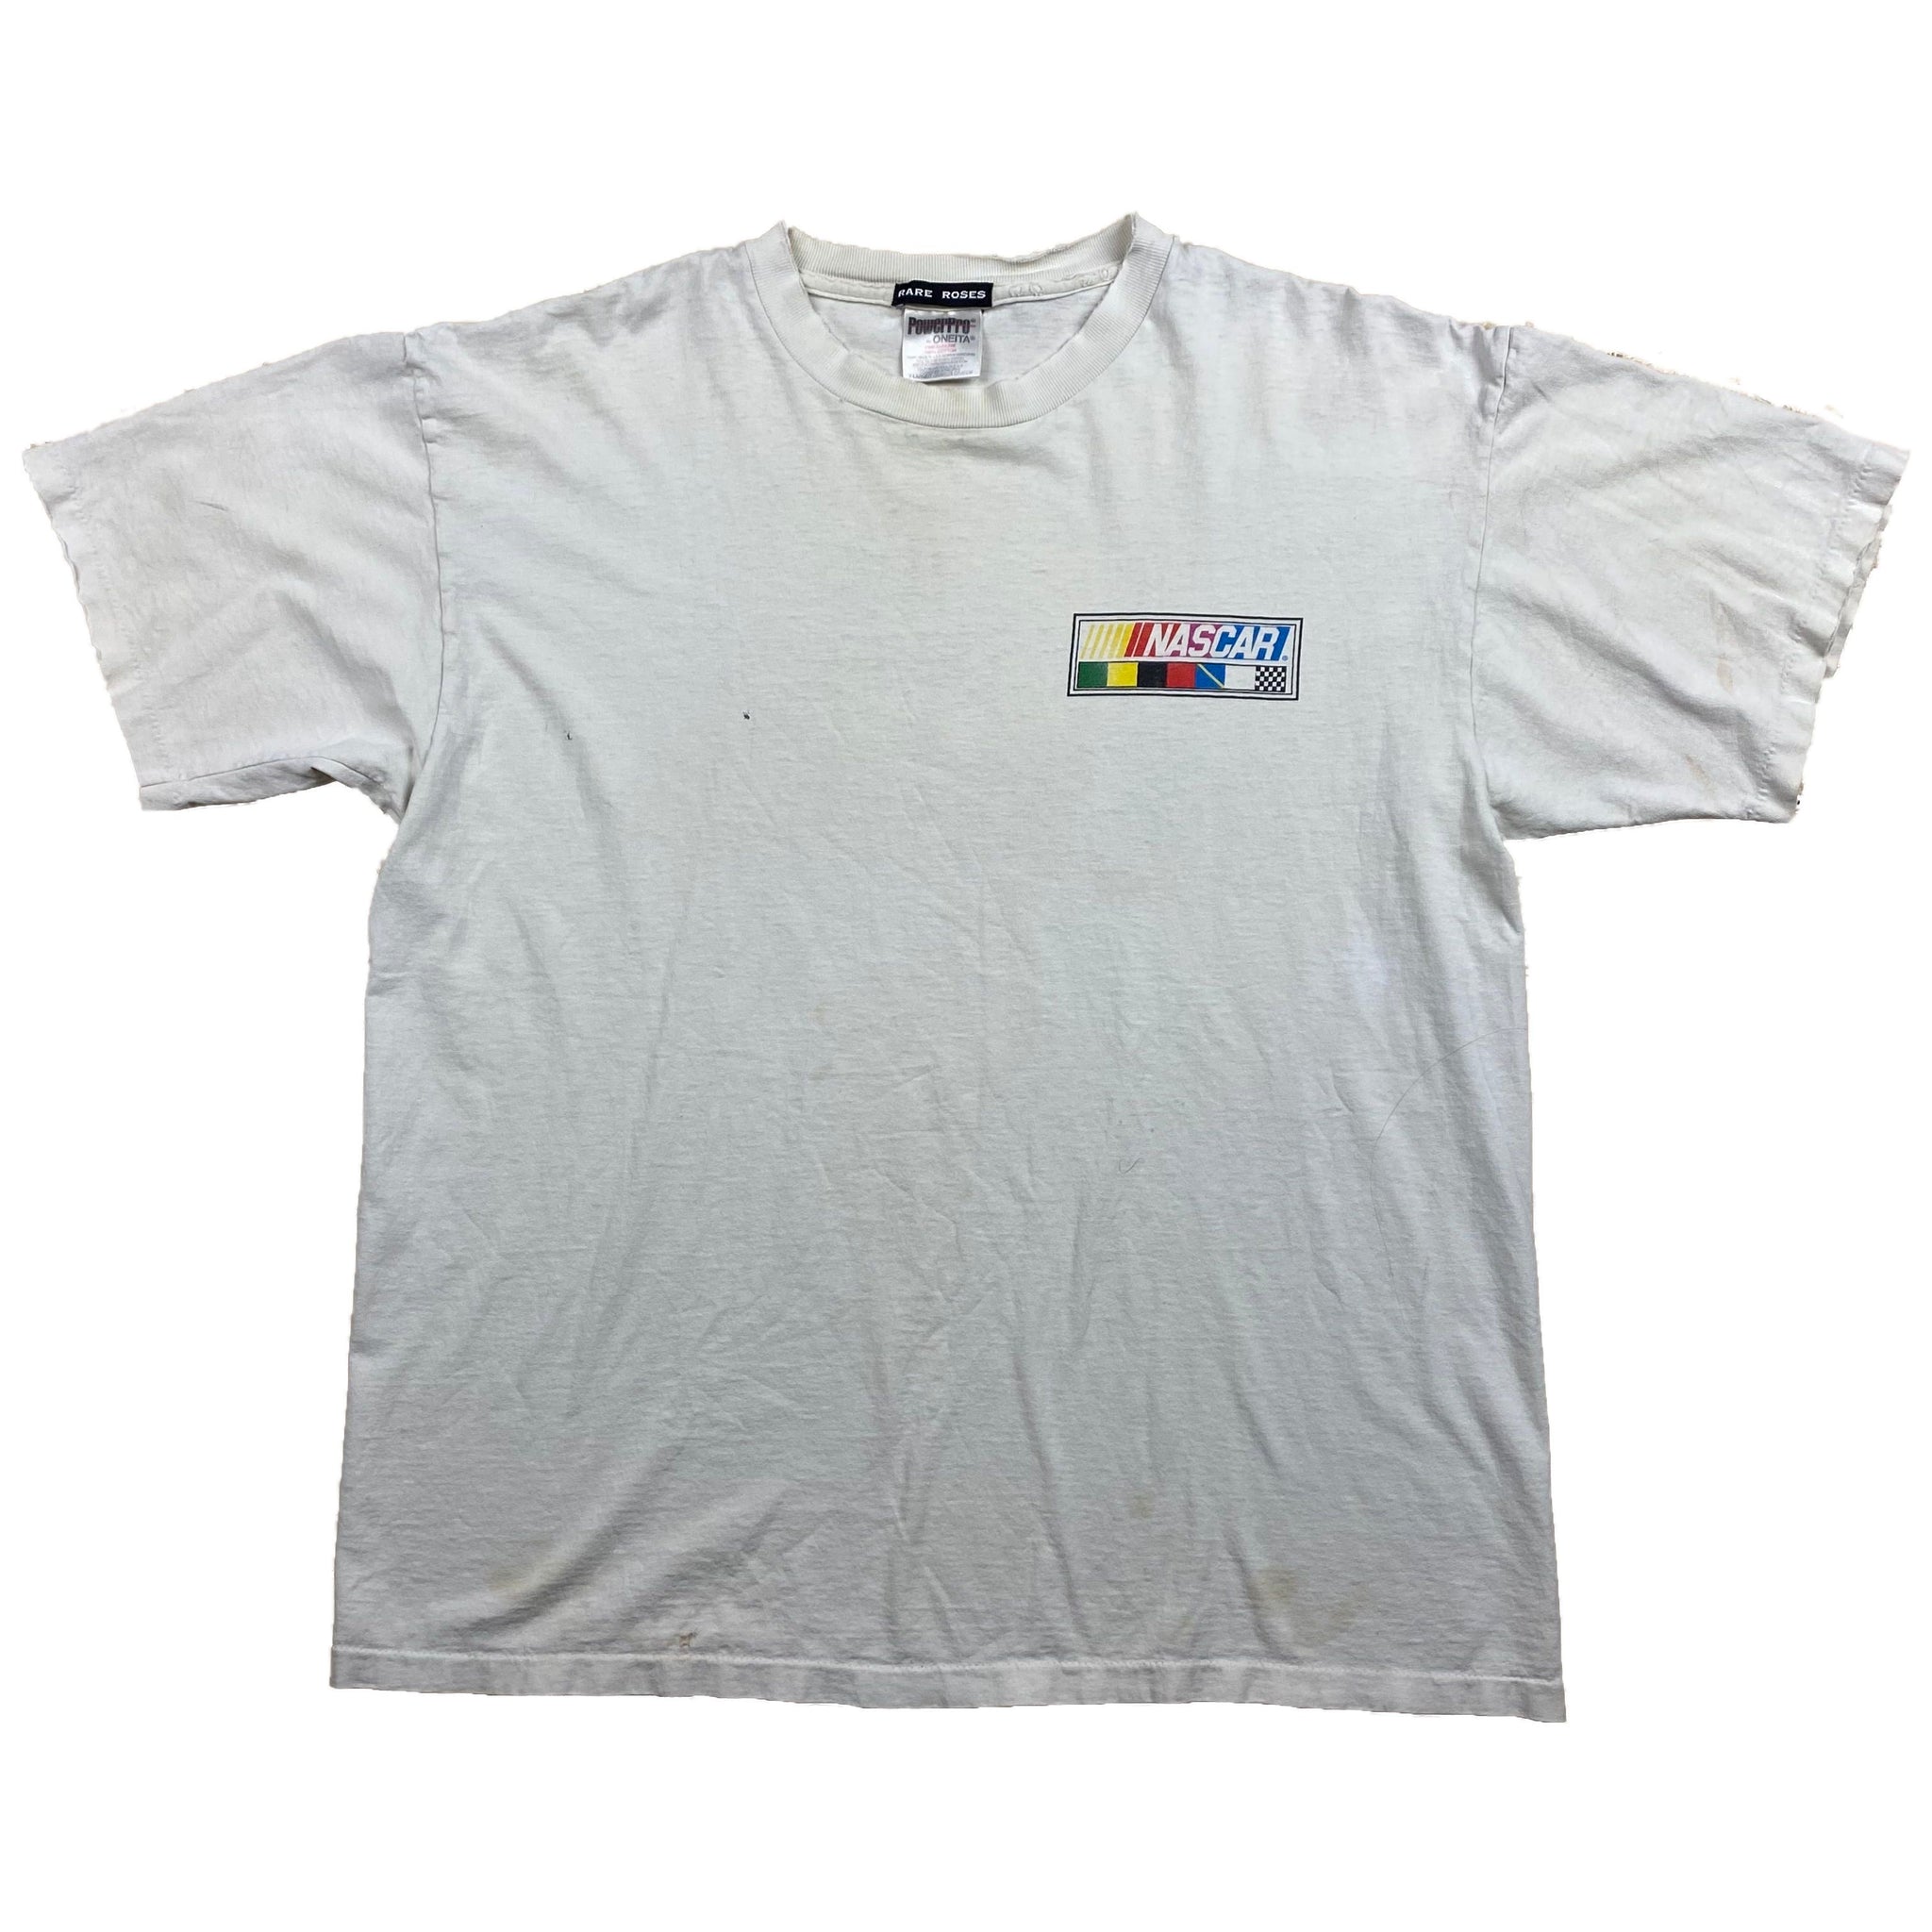 Distressed Nascar Flags Tee